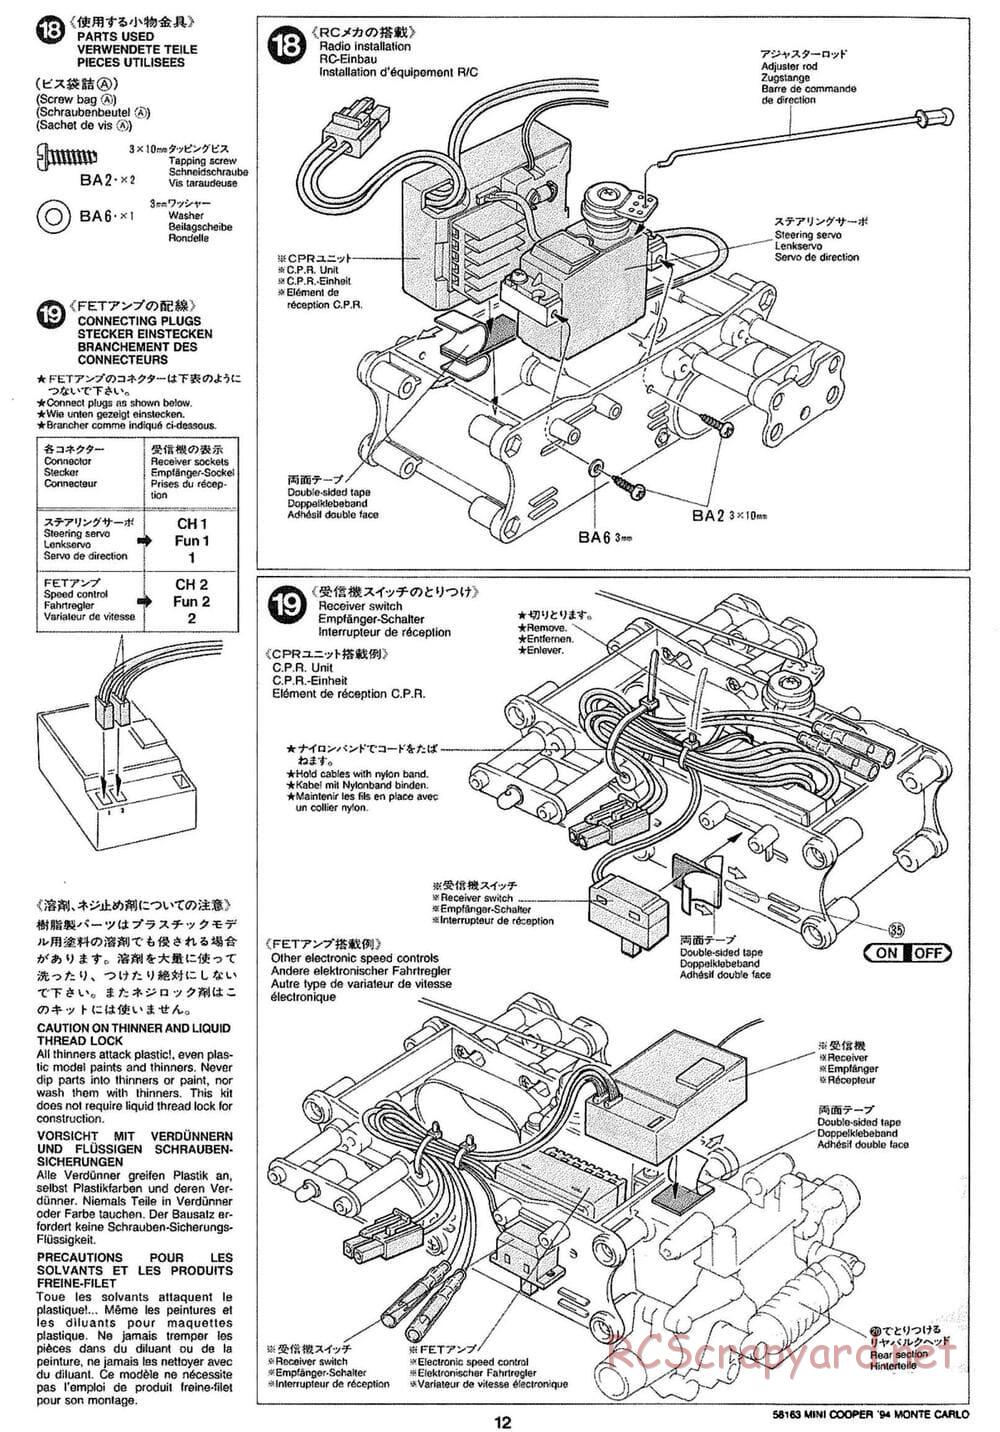 Tamiya - Rover Mini Cooper 94 Monte-Carlo - M01 Chassis - Manual - Page 12